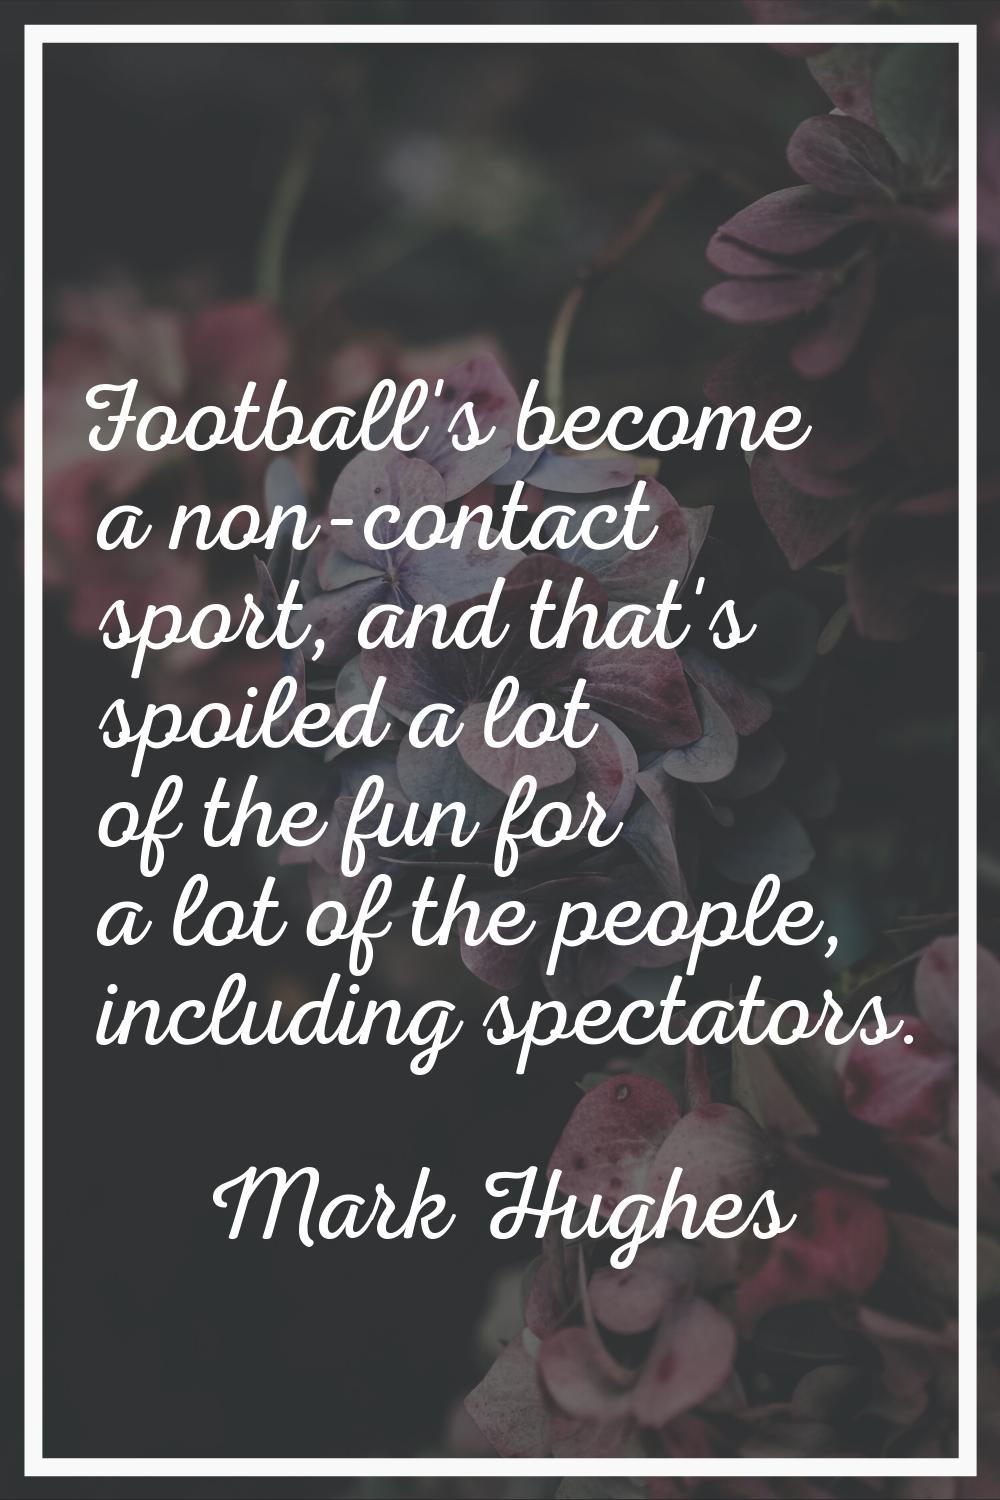 Football's become a non-contact sport, and that's spoiled a lot of the fun for a lot of the people,